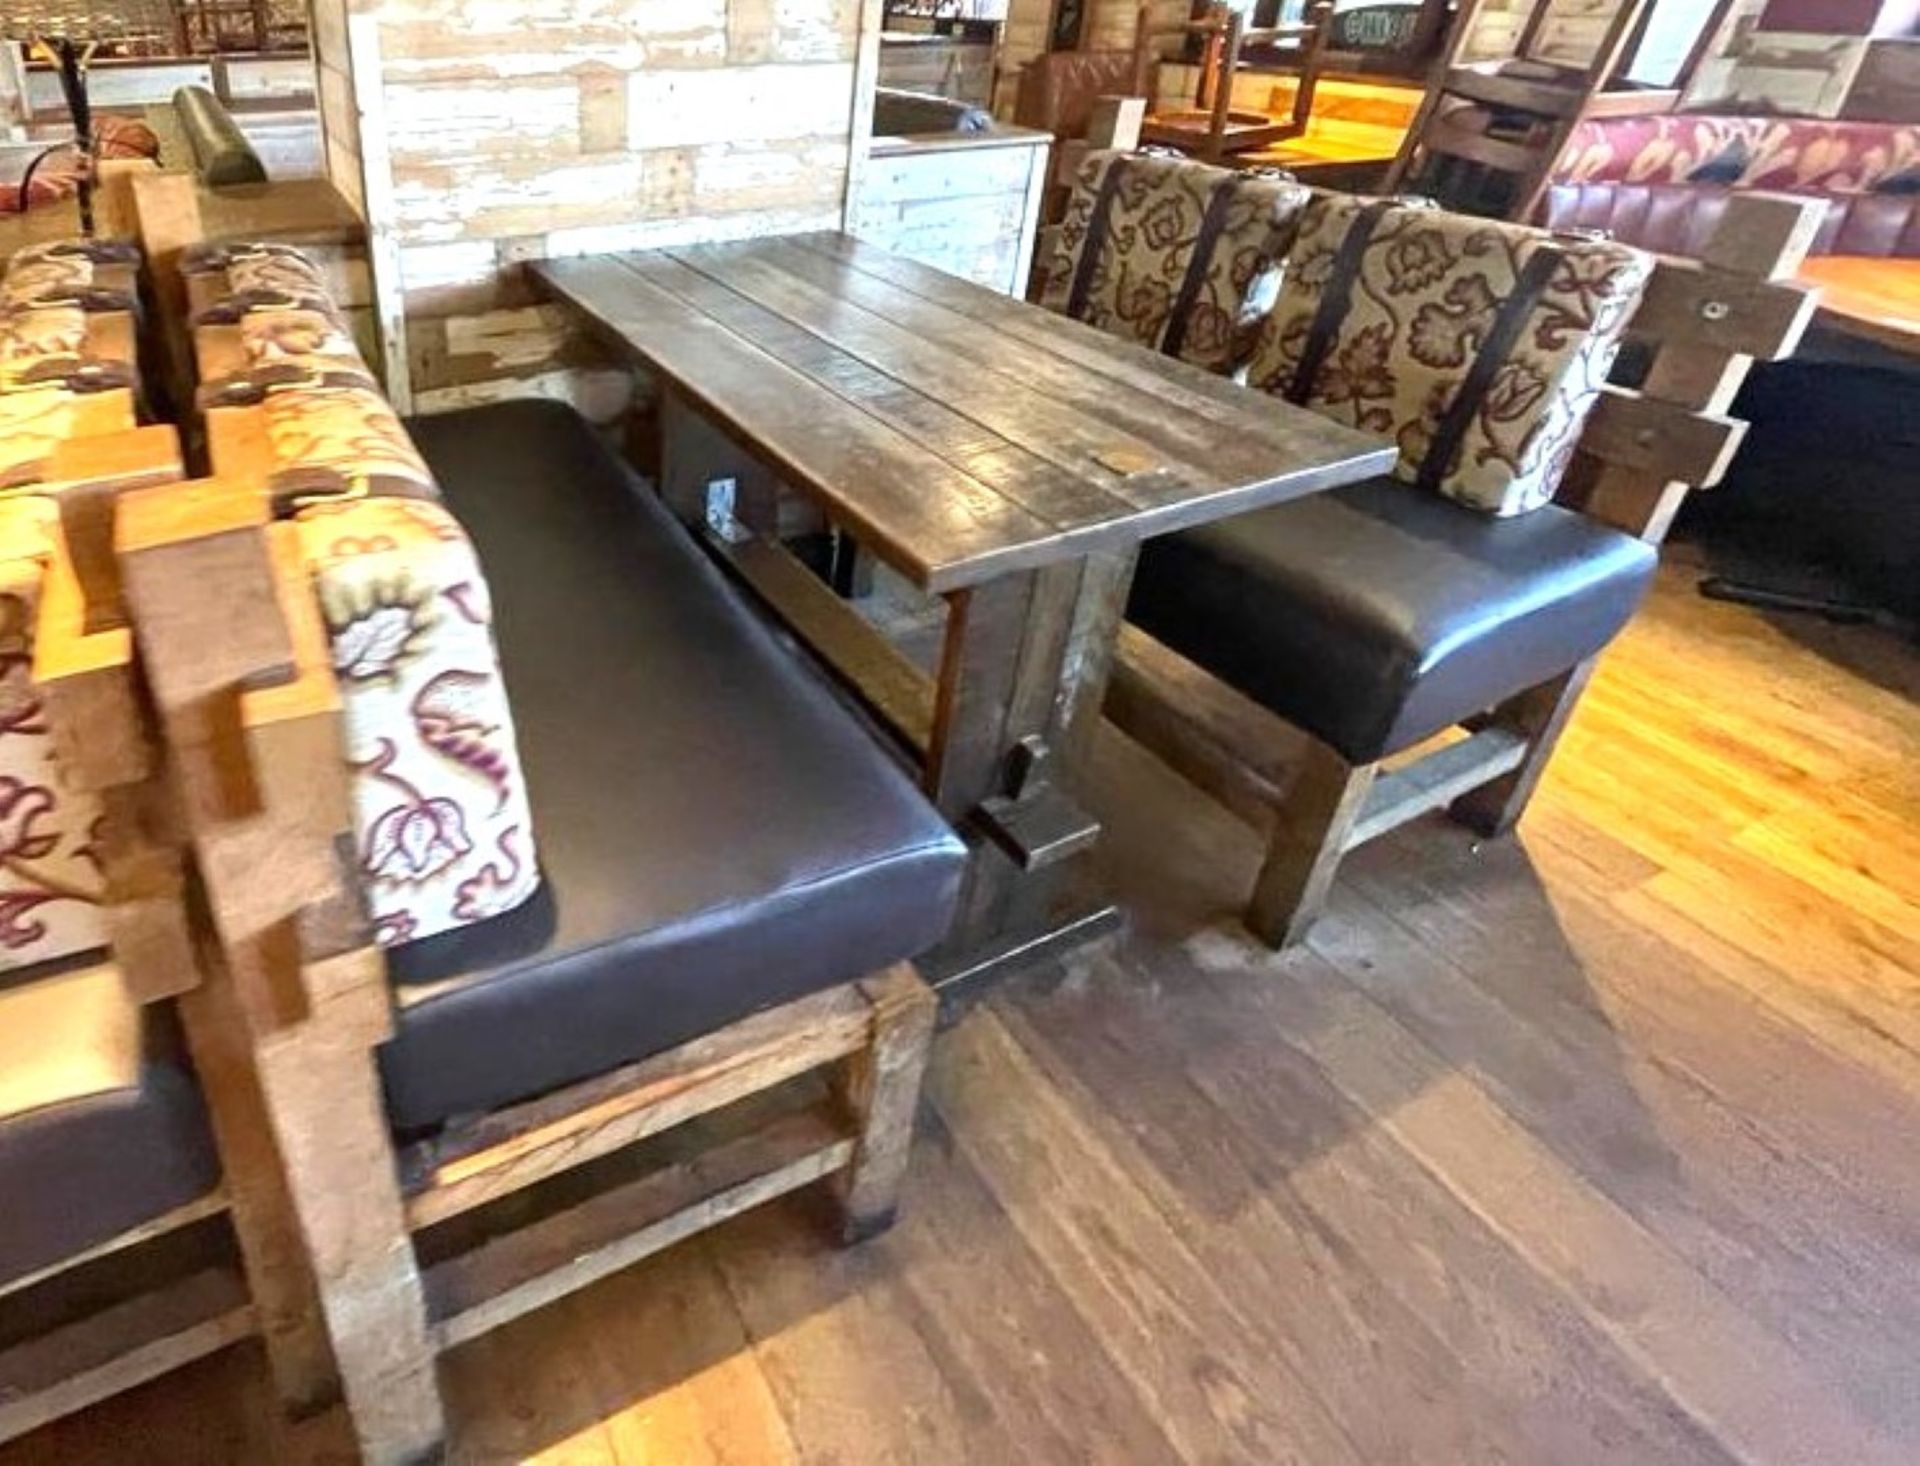 2 x Handcrafted Solid Wood Seating Benches With a Rustic Farmhouse Dining Table - Features Brown